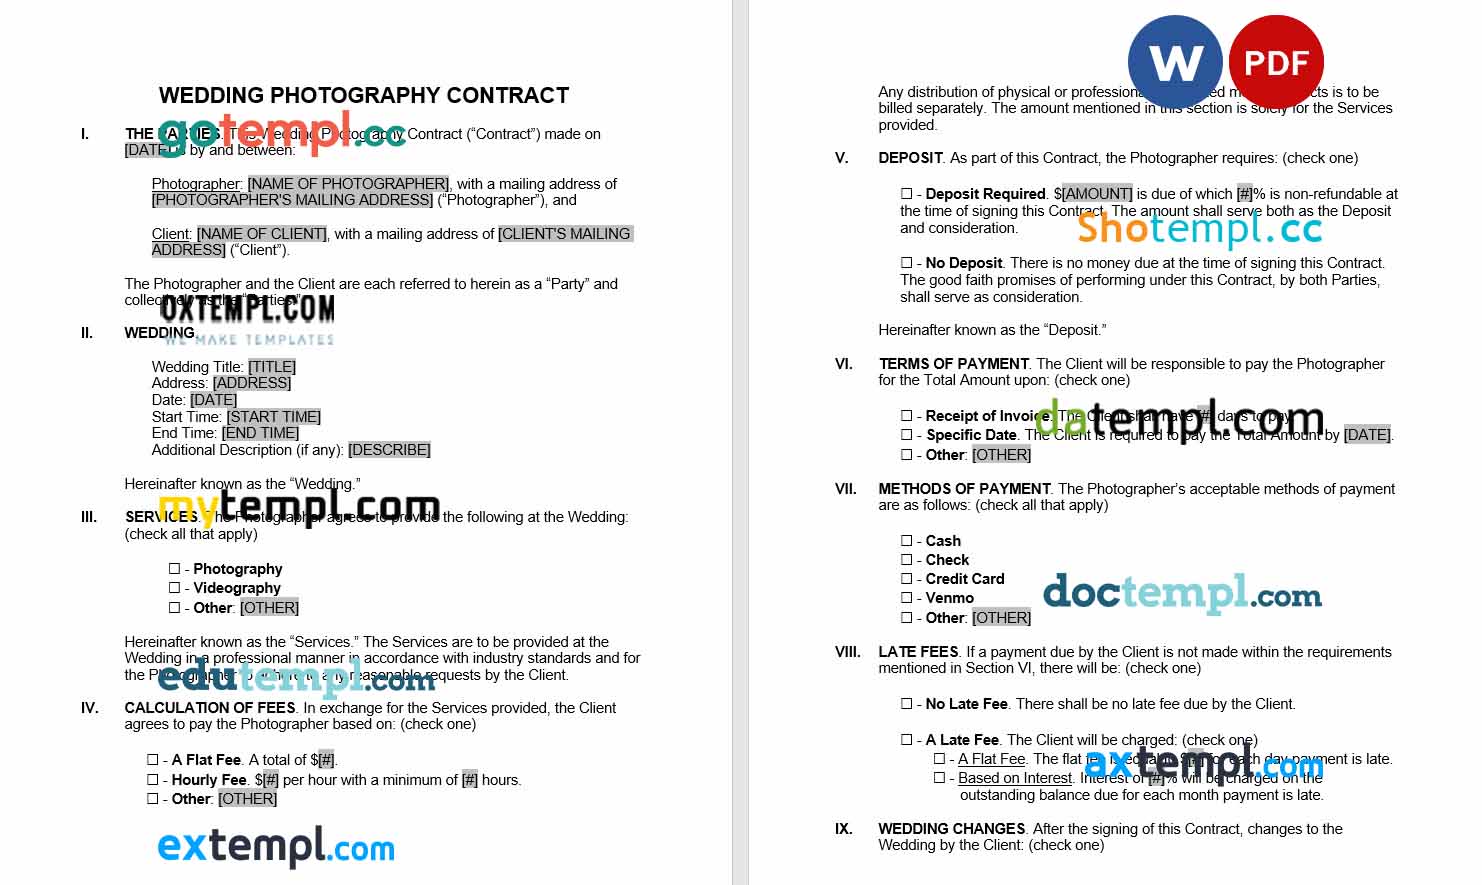 wedding photograhy contract ptemplate, Word and PDF format